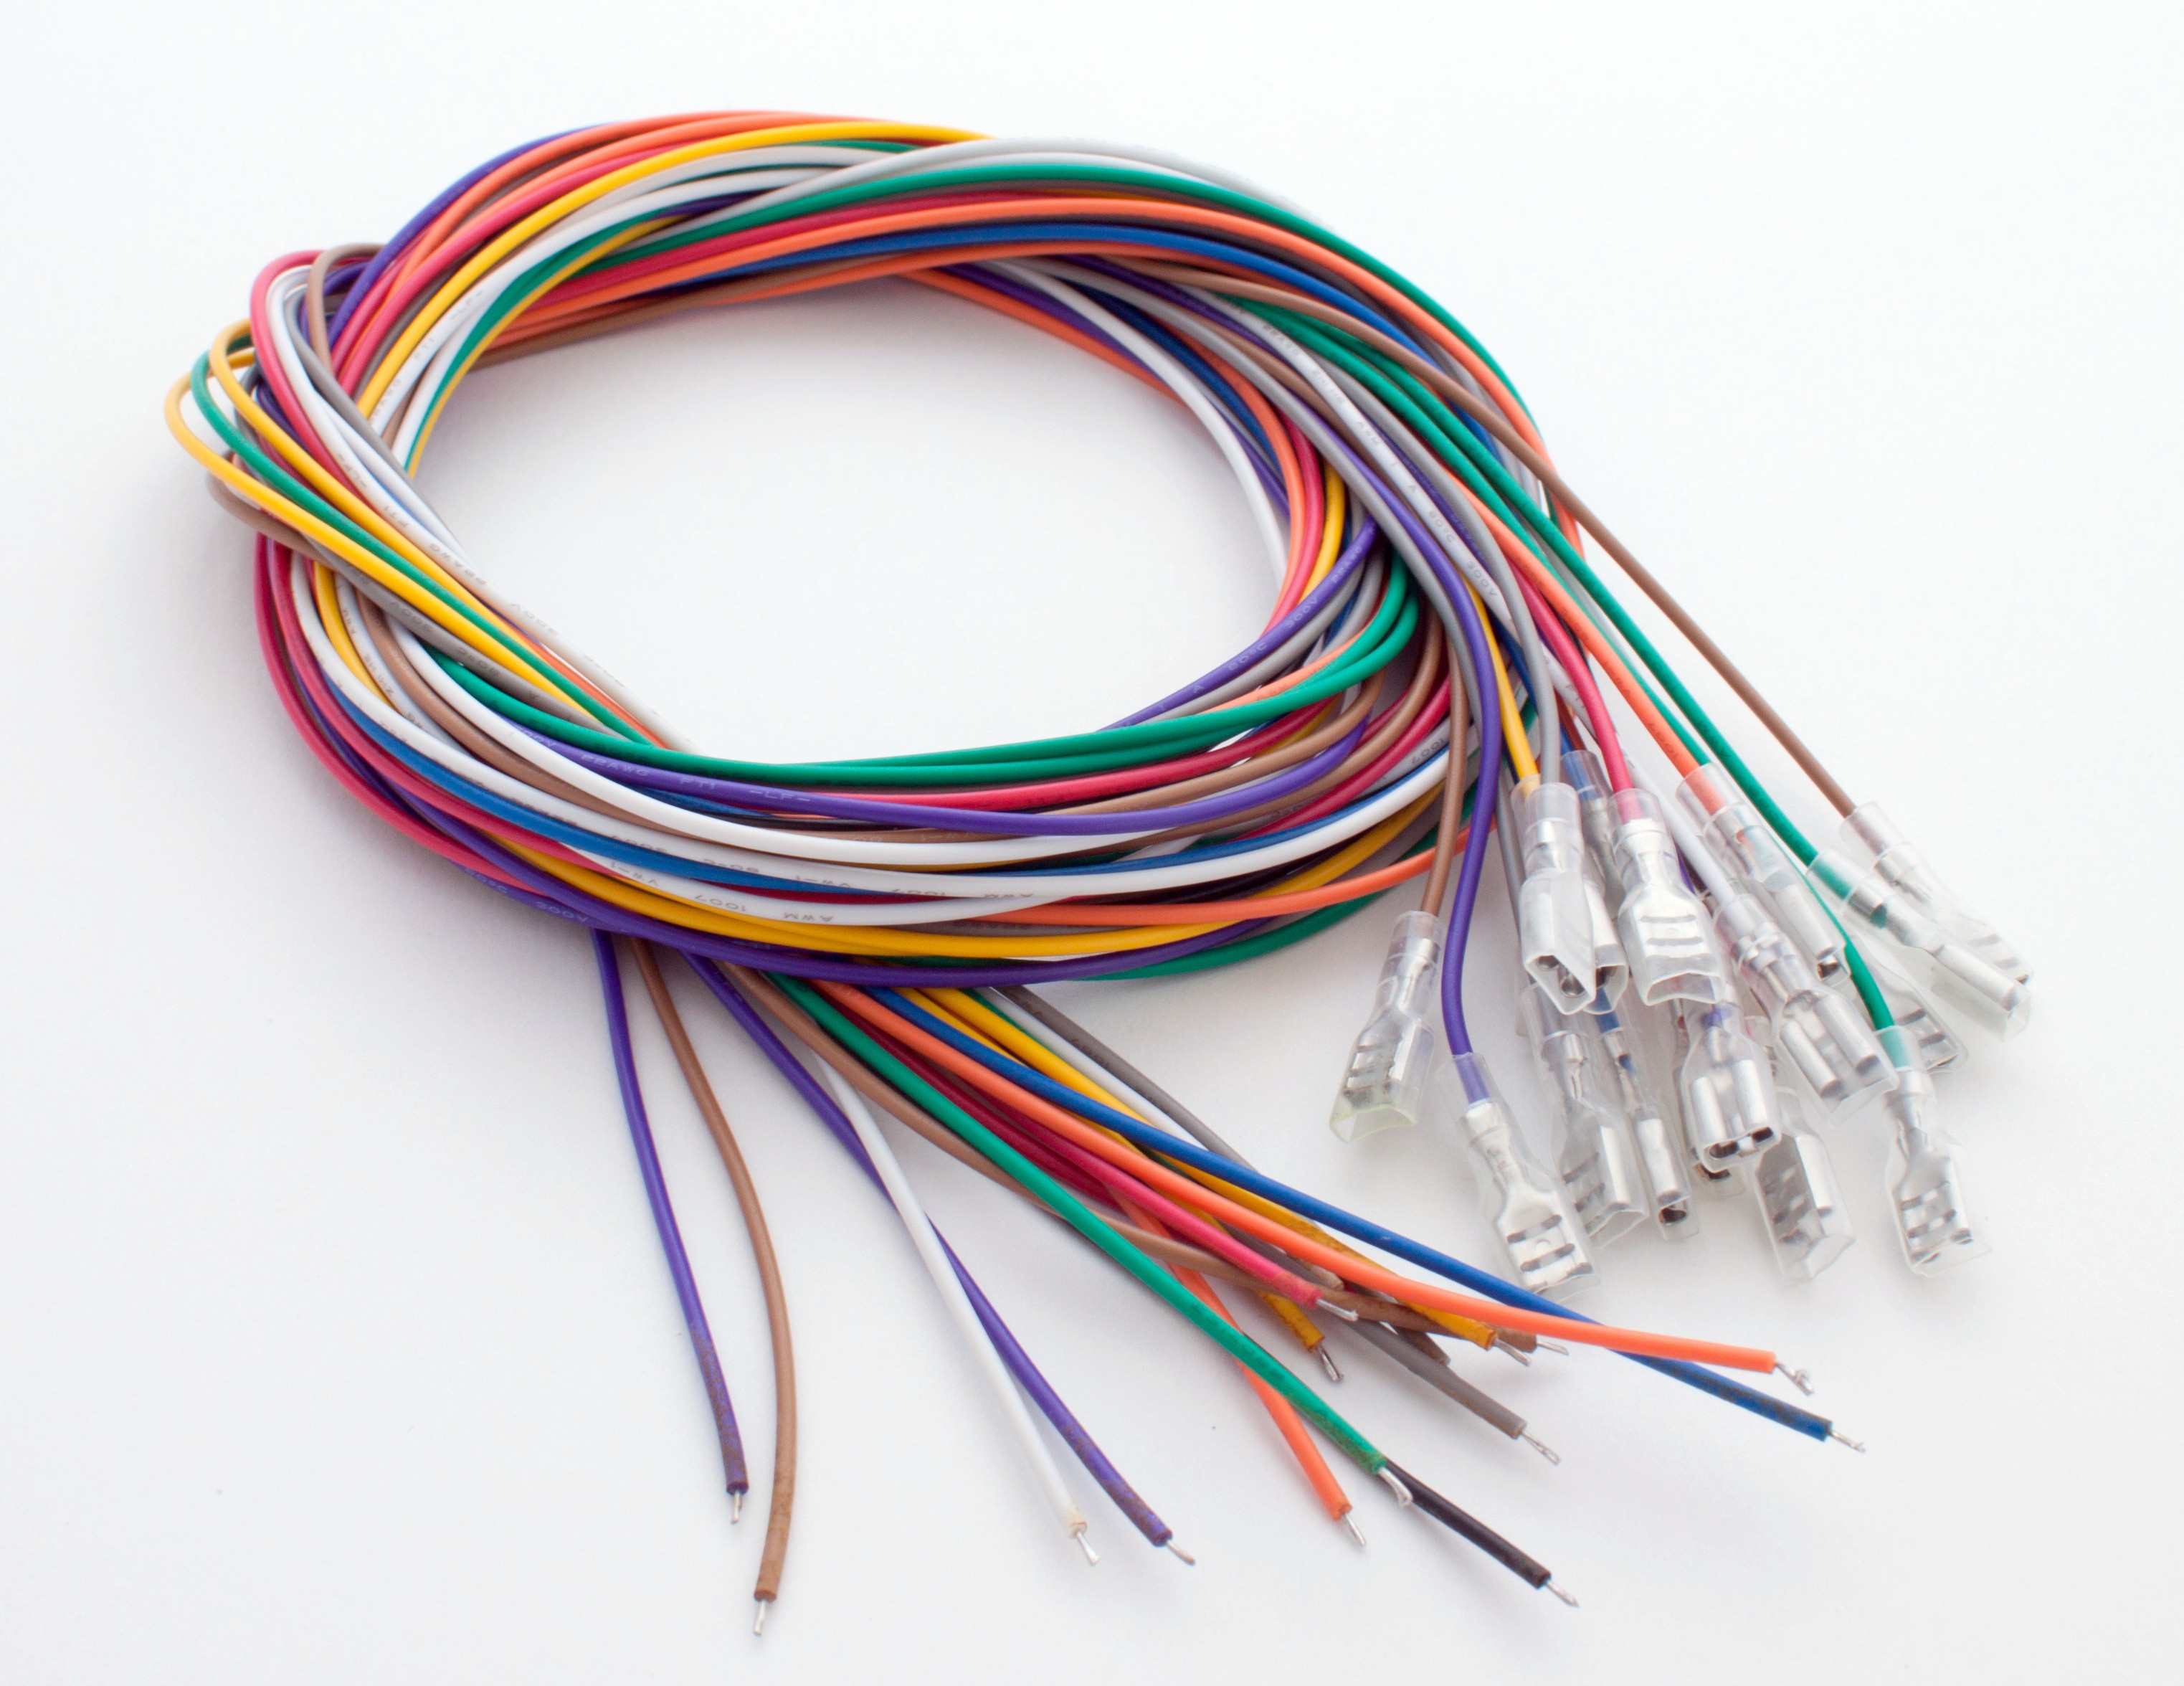 16 wire rainbow pack(tm) with .187